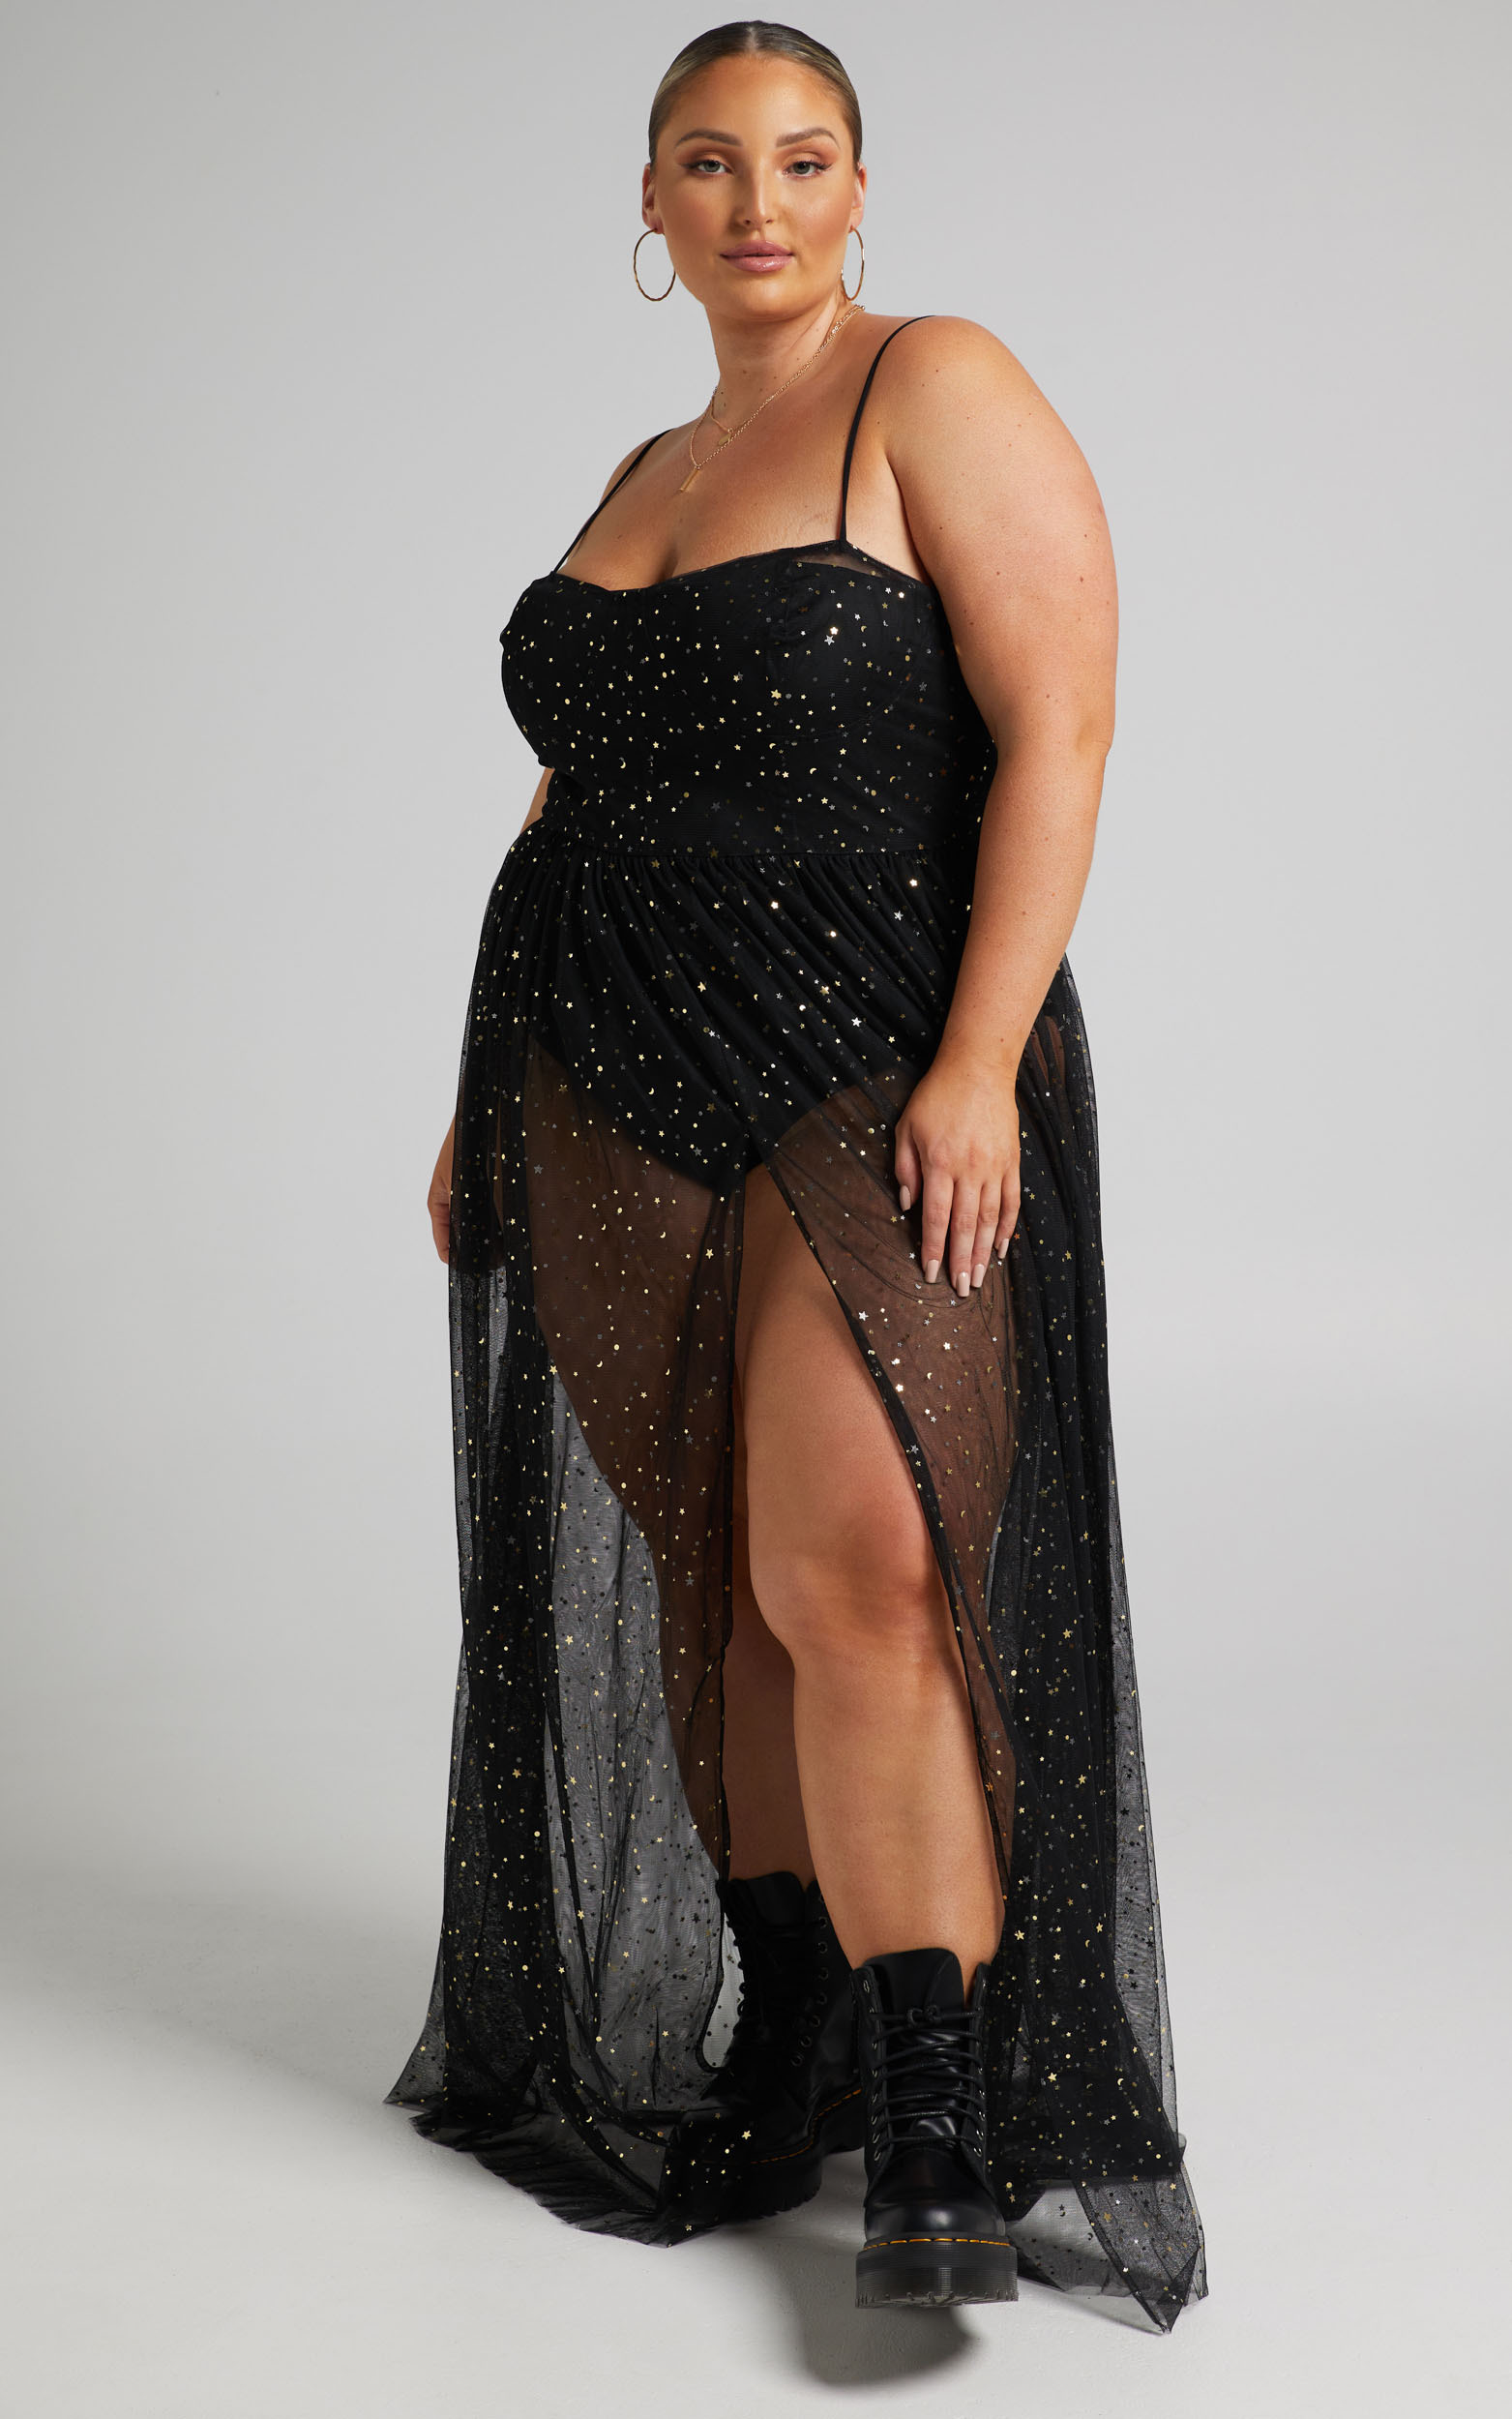 Stunning View Bodice Maxi Dress in Black Mesh - 04, BLK1, hi-res image number null